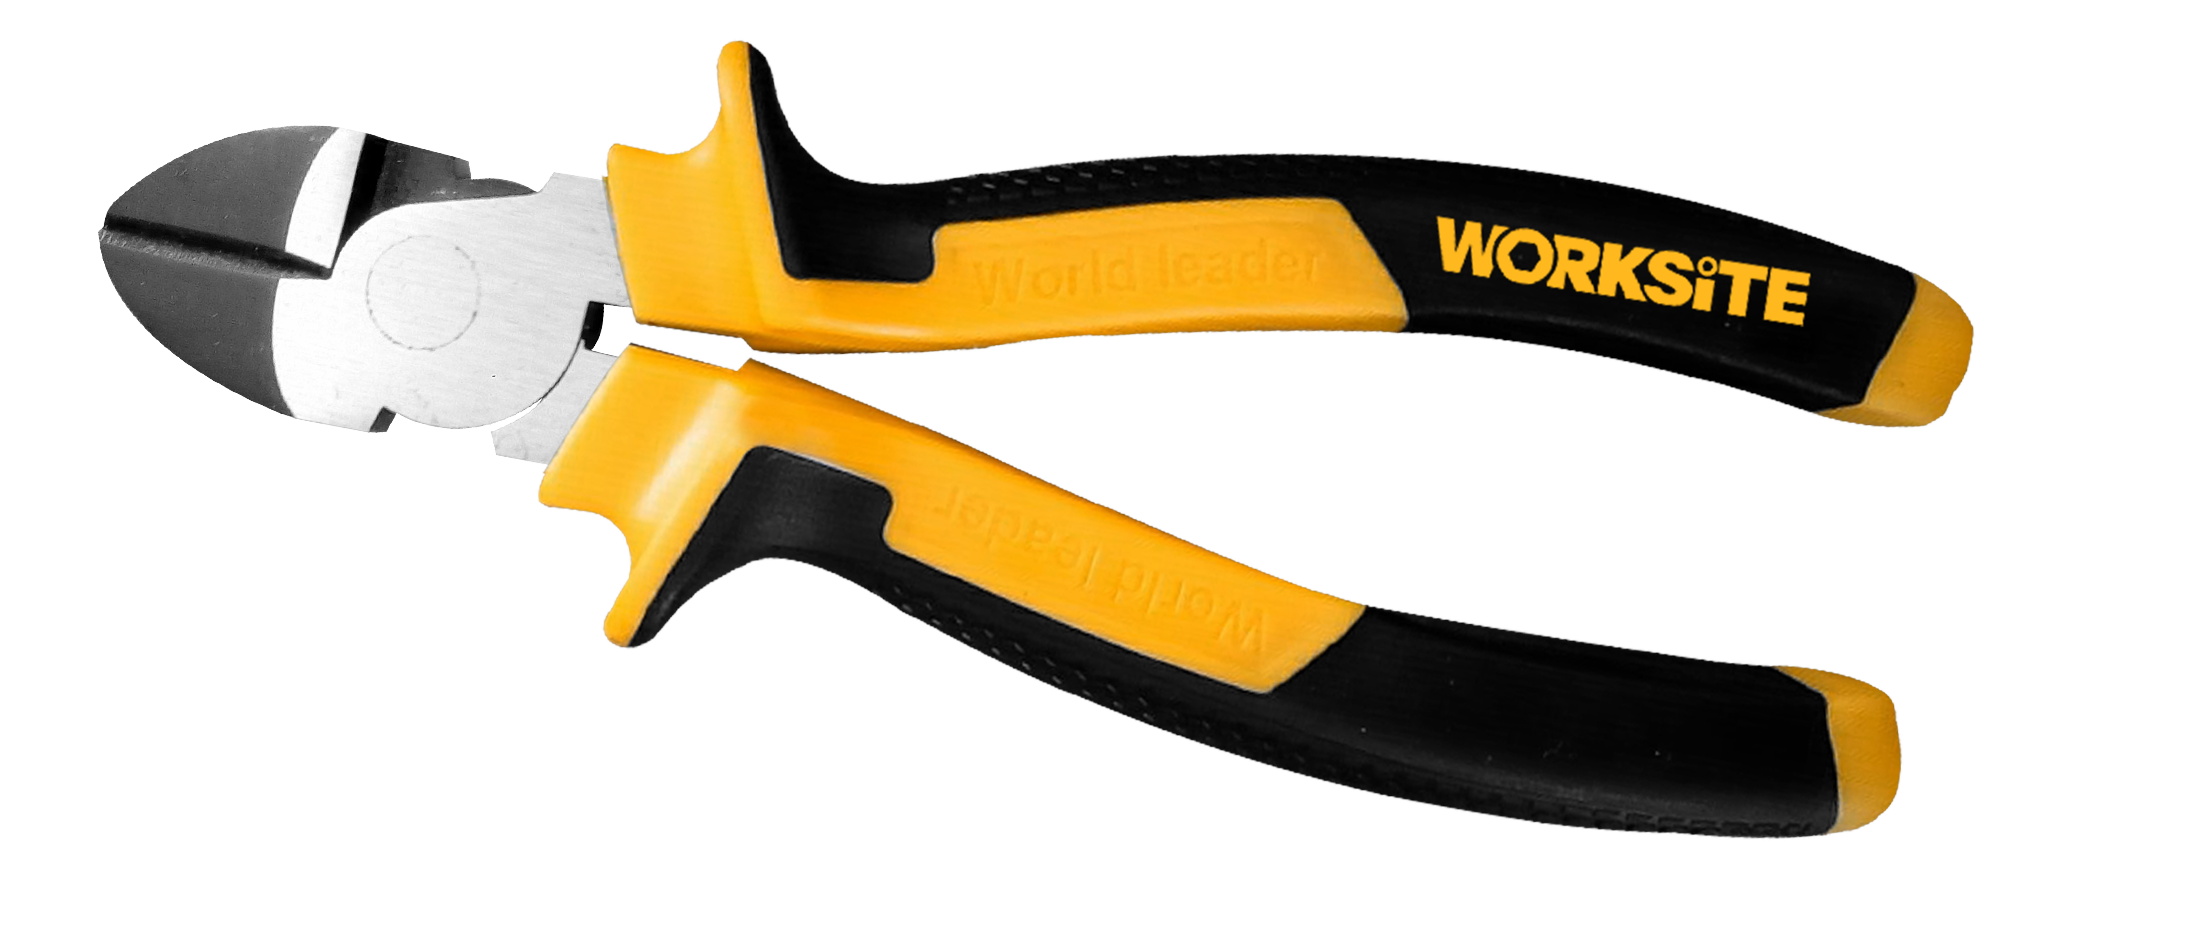 Worksite Diagonal Cutter Pliers High Leverage, 6inch/7inch All